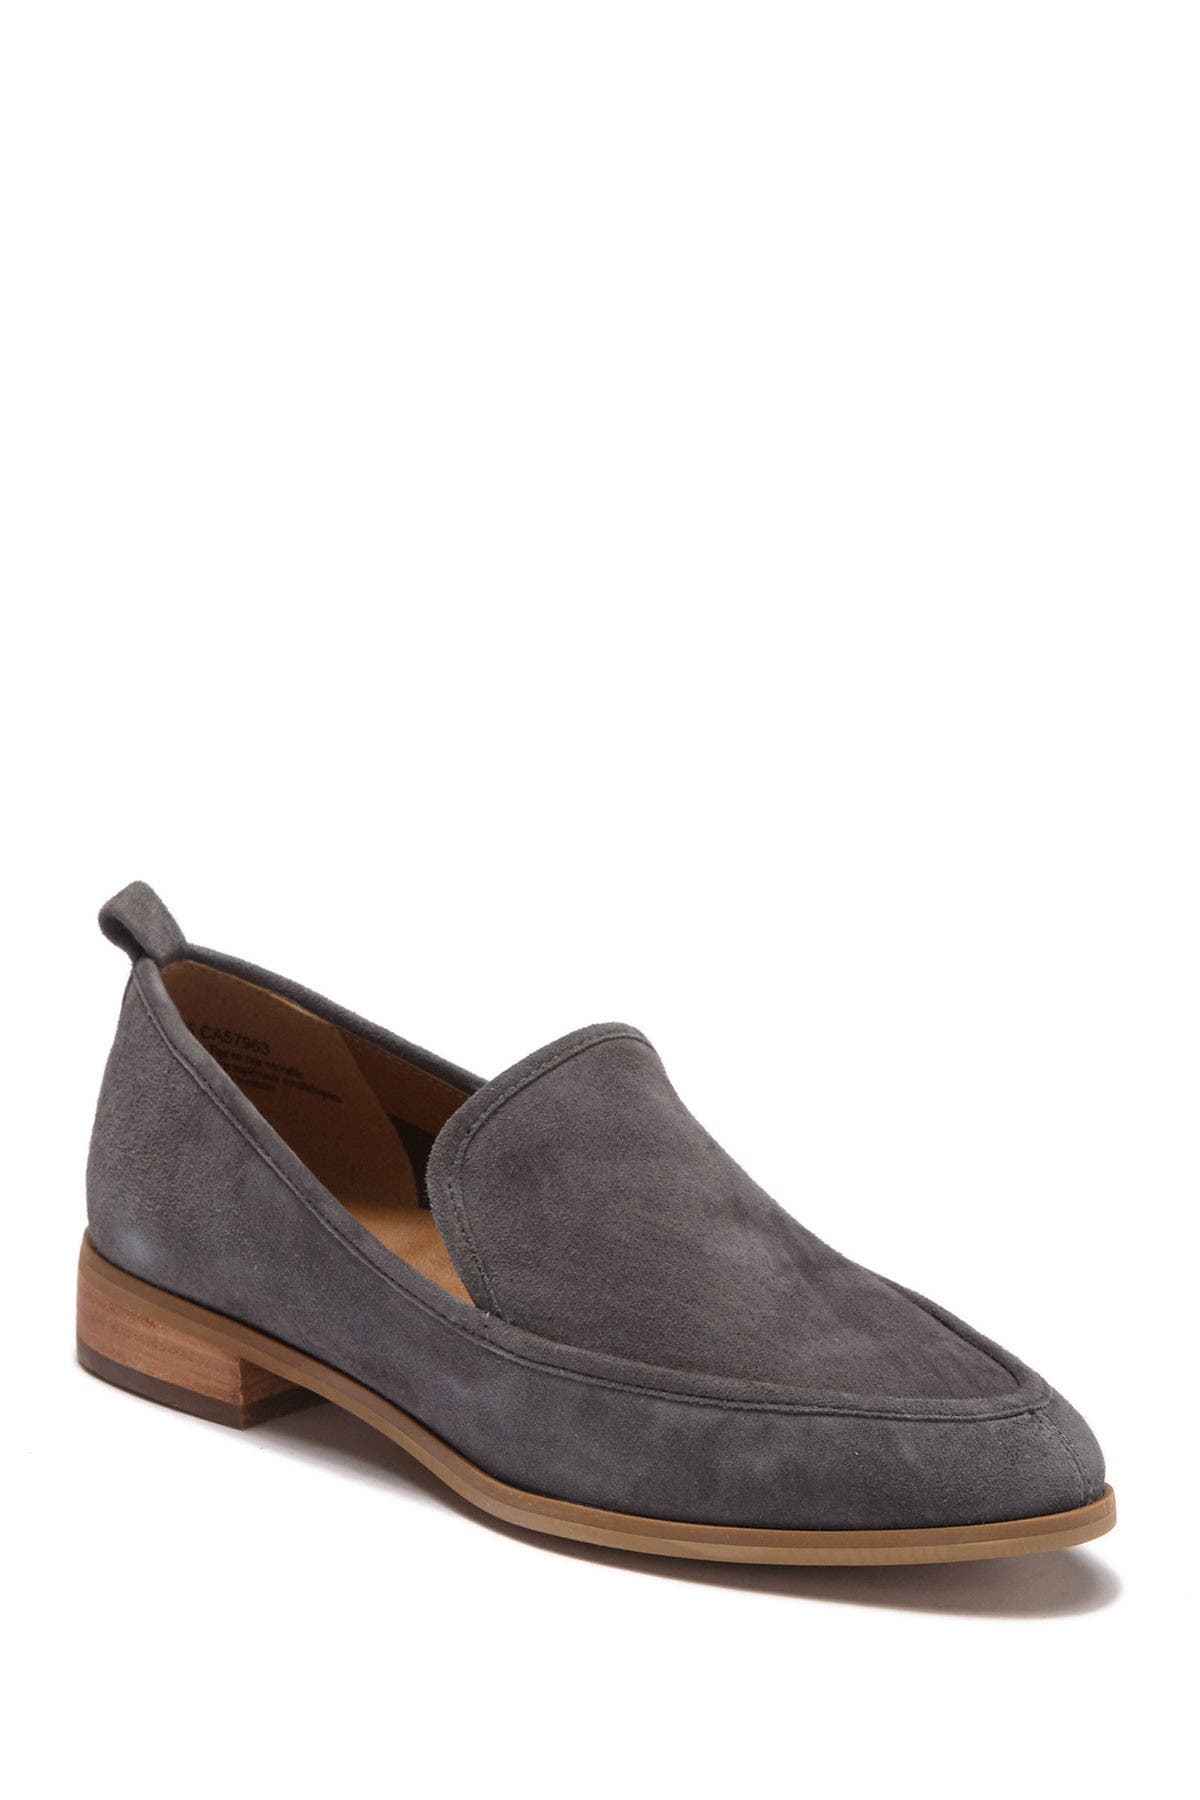 womens loafers nordstrom rack